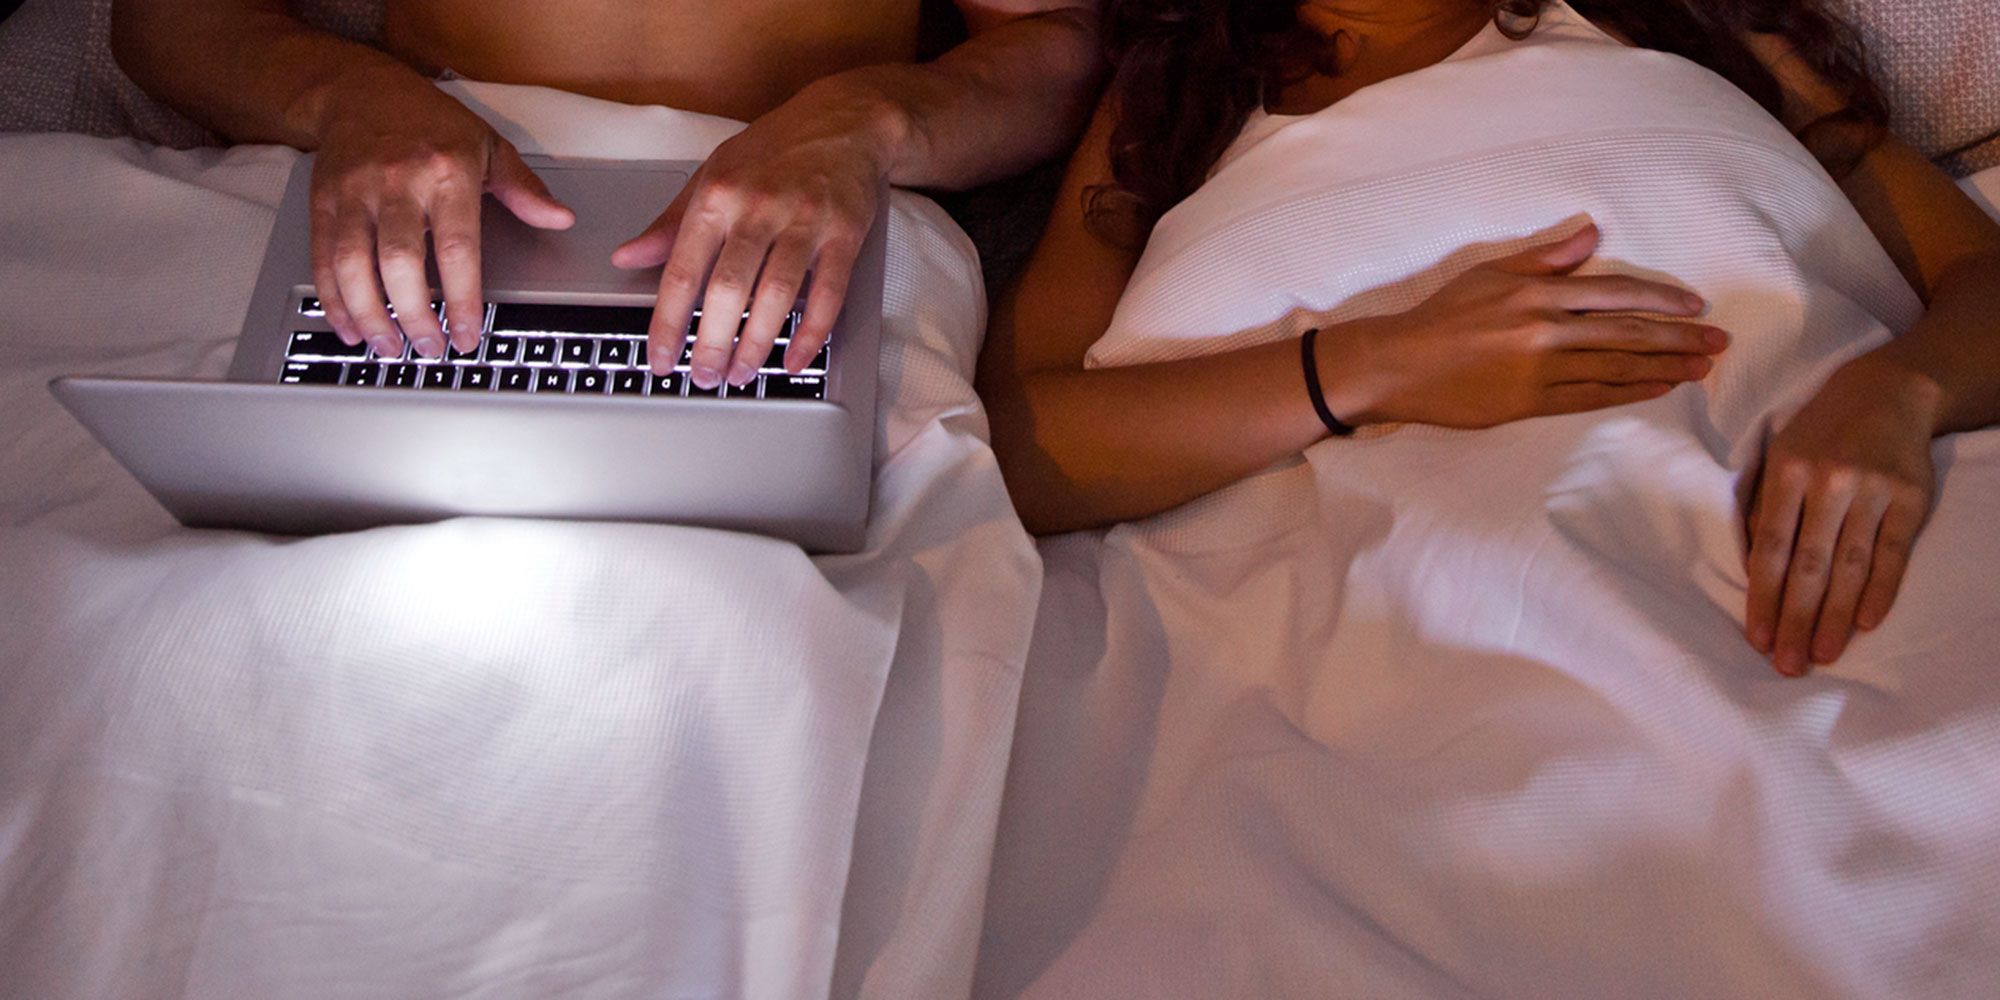 Watching porn together Why couples watch porn image